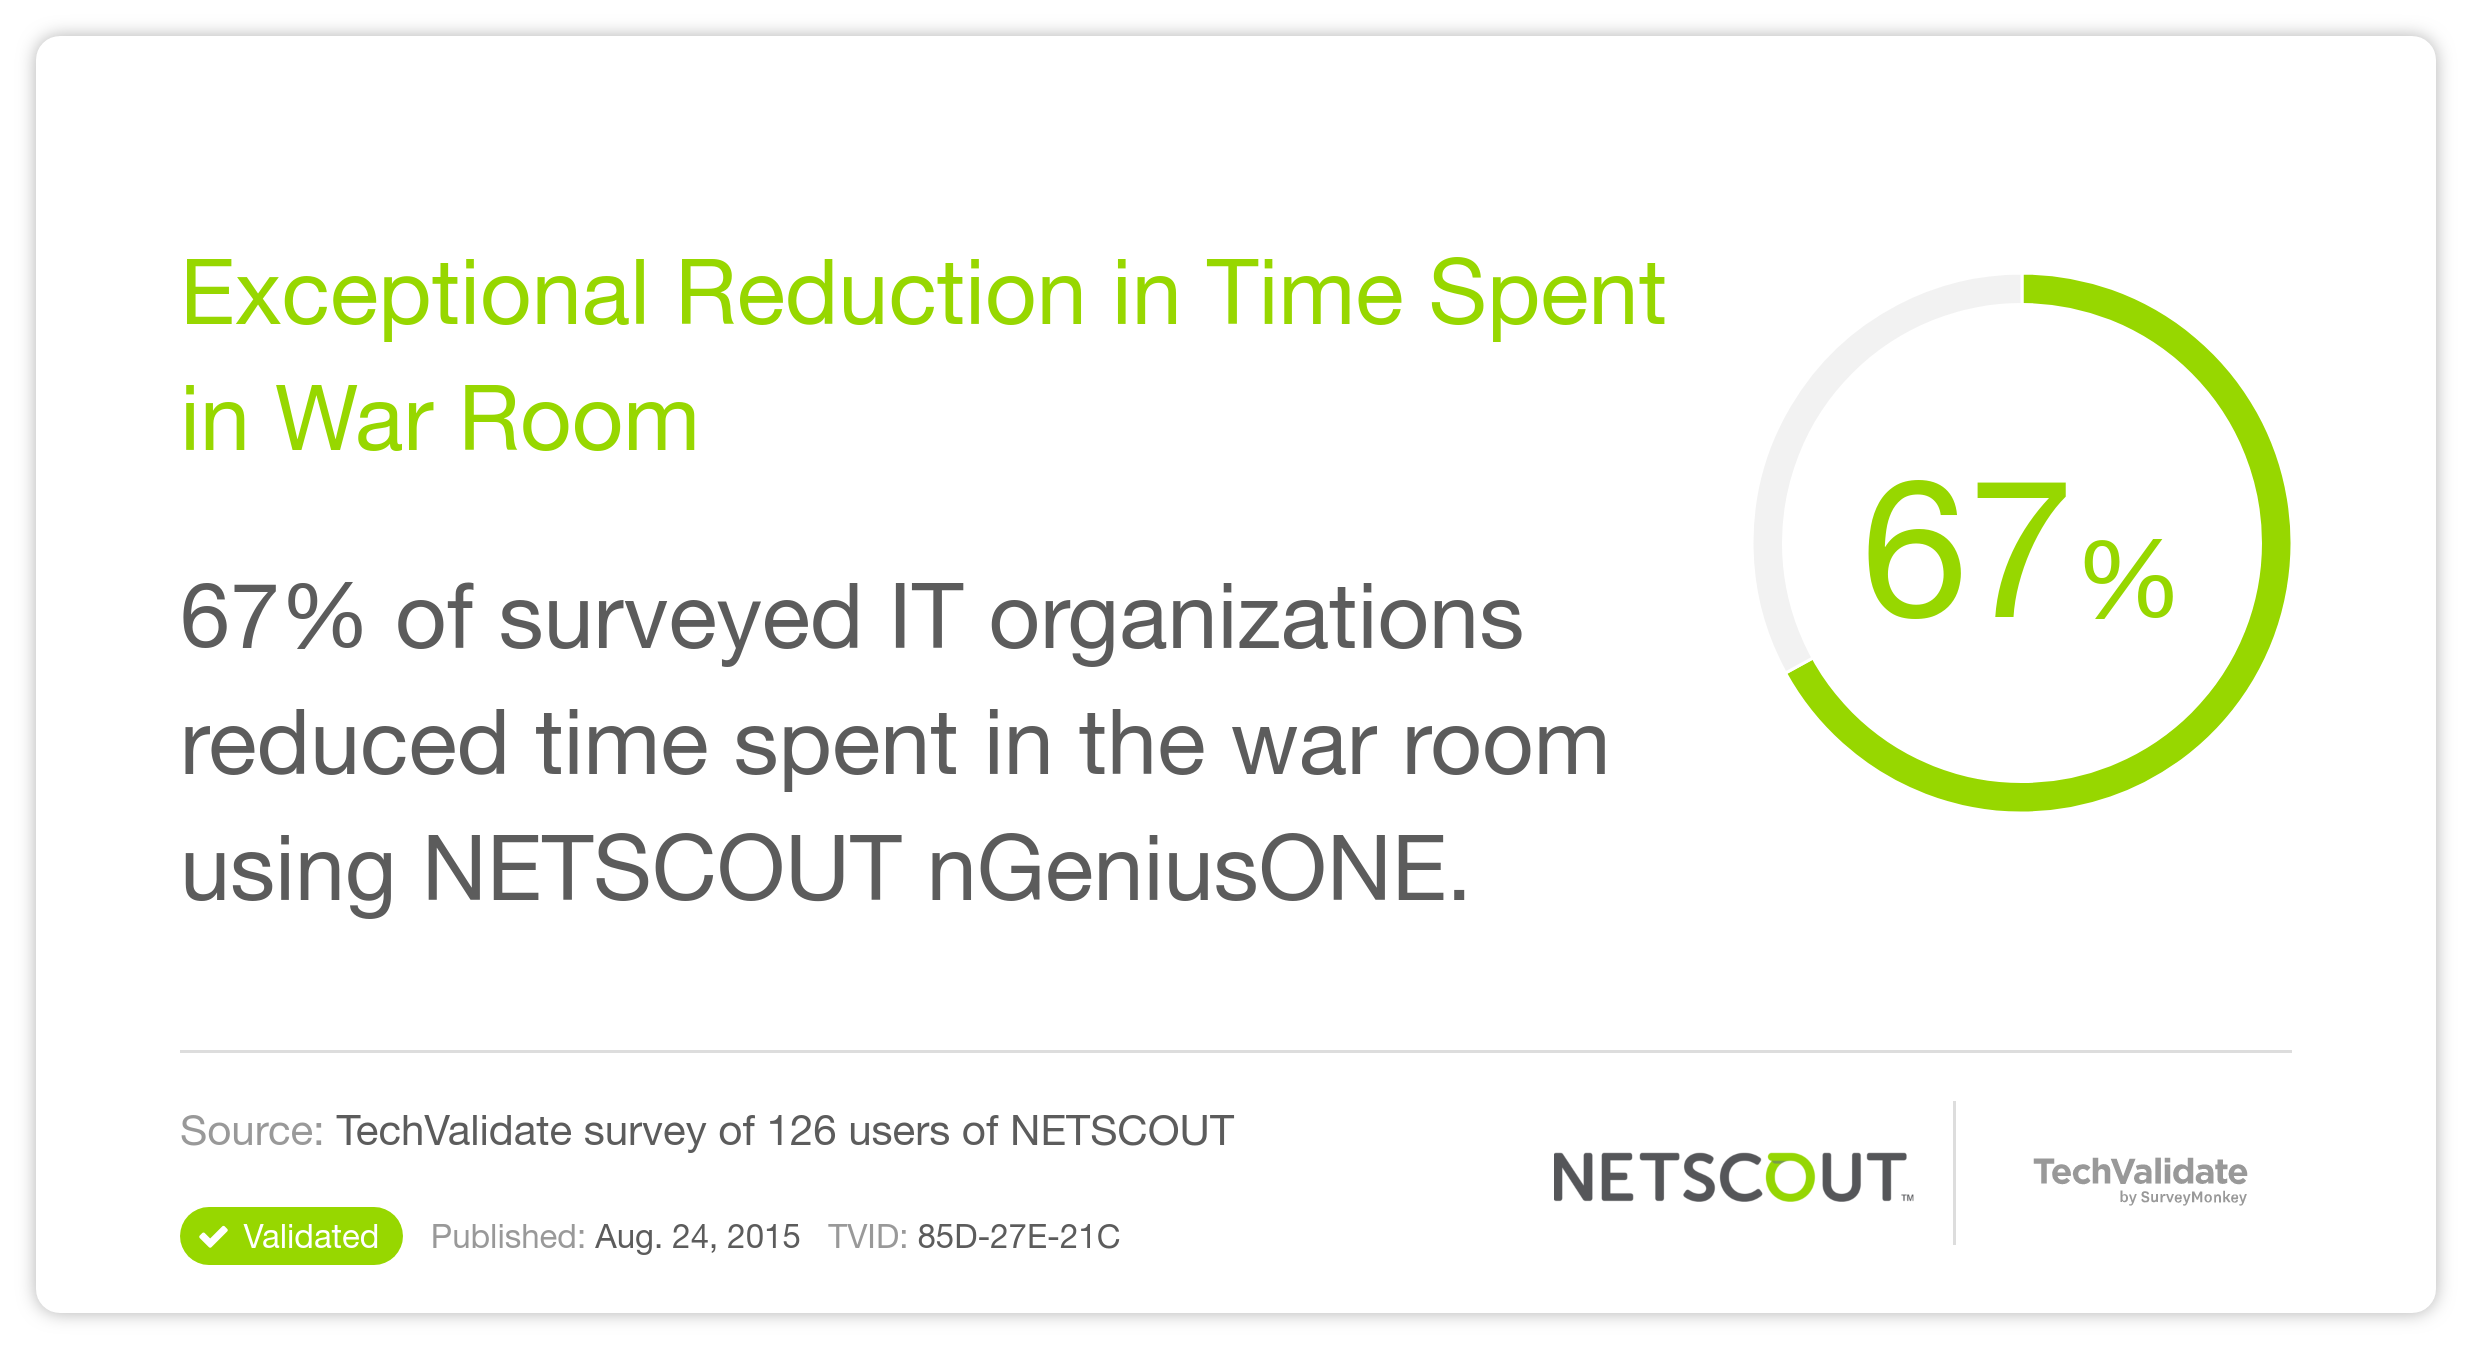 Exceptional Reduction in Time Spent in War Room